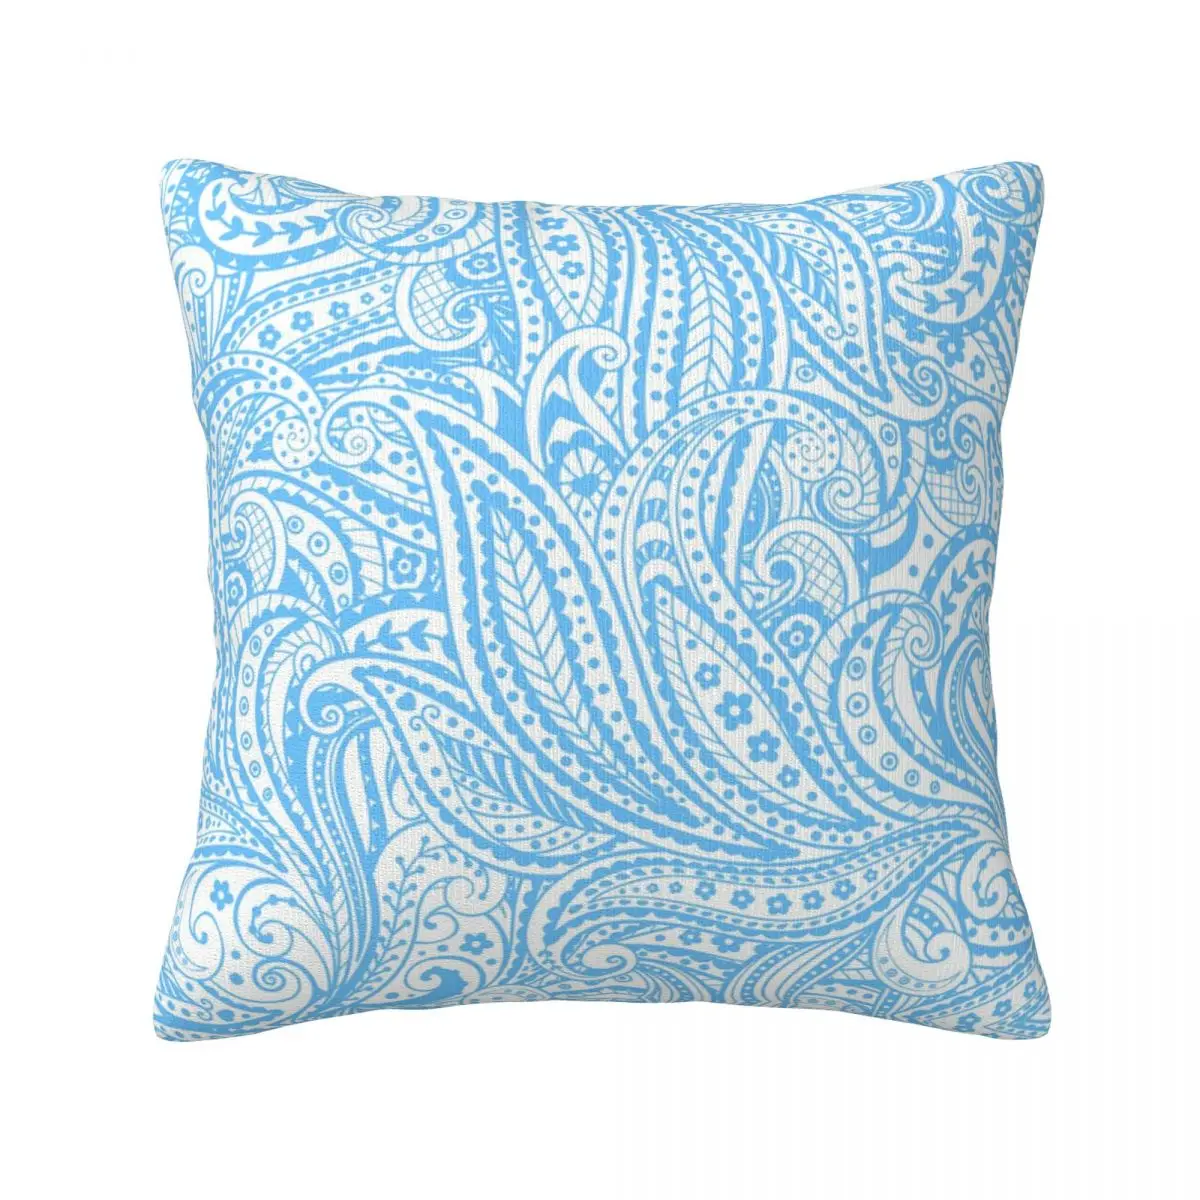 

Beautiful Blue Paisley Throw Pillow Cover Decorative Pillow Covers Home Pillows Shells Cushion Cover Zippered Pillowcase